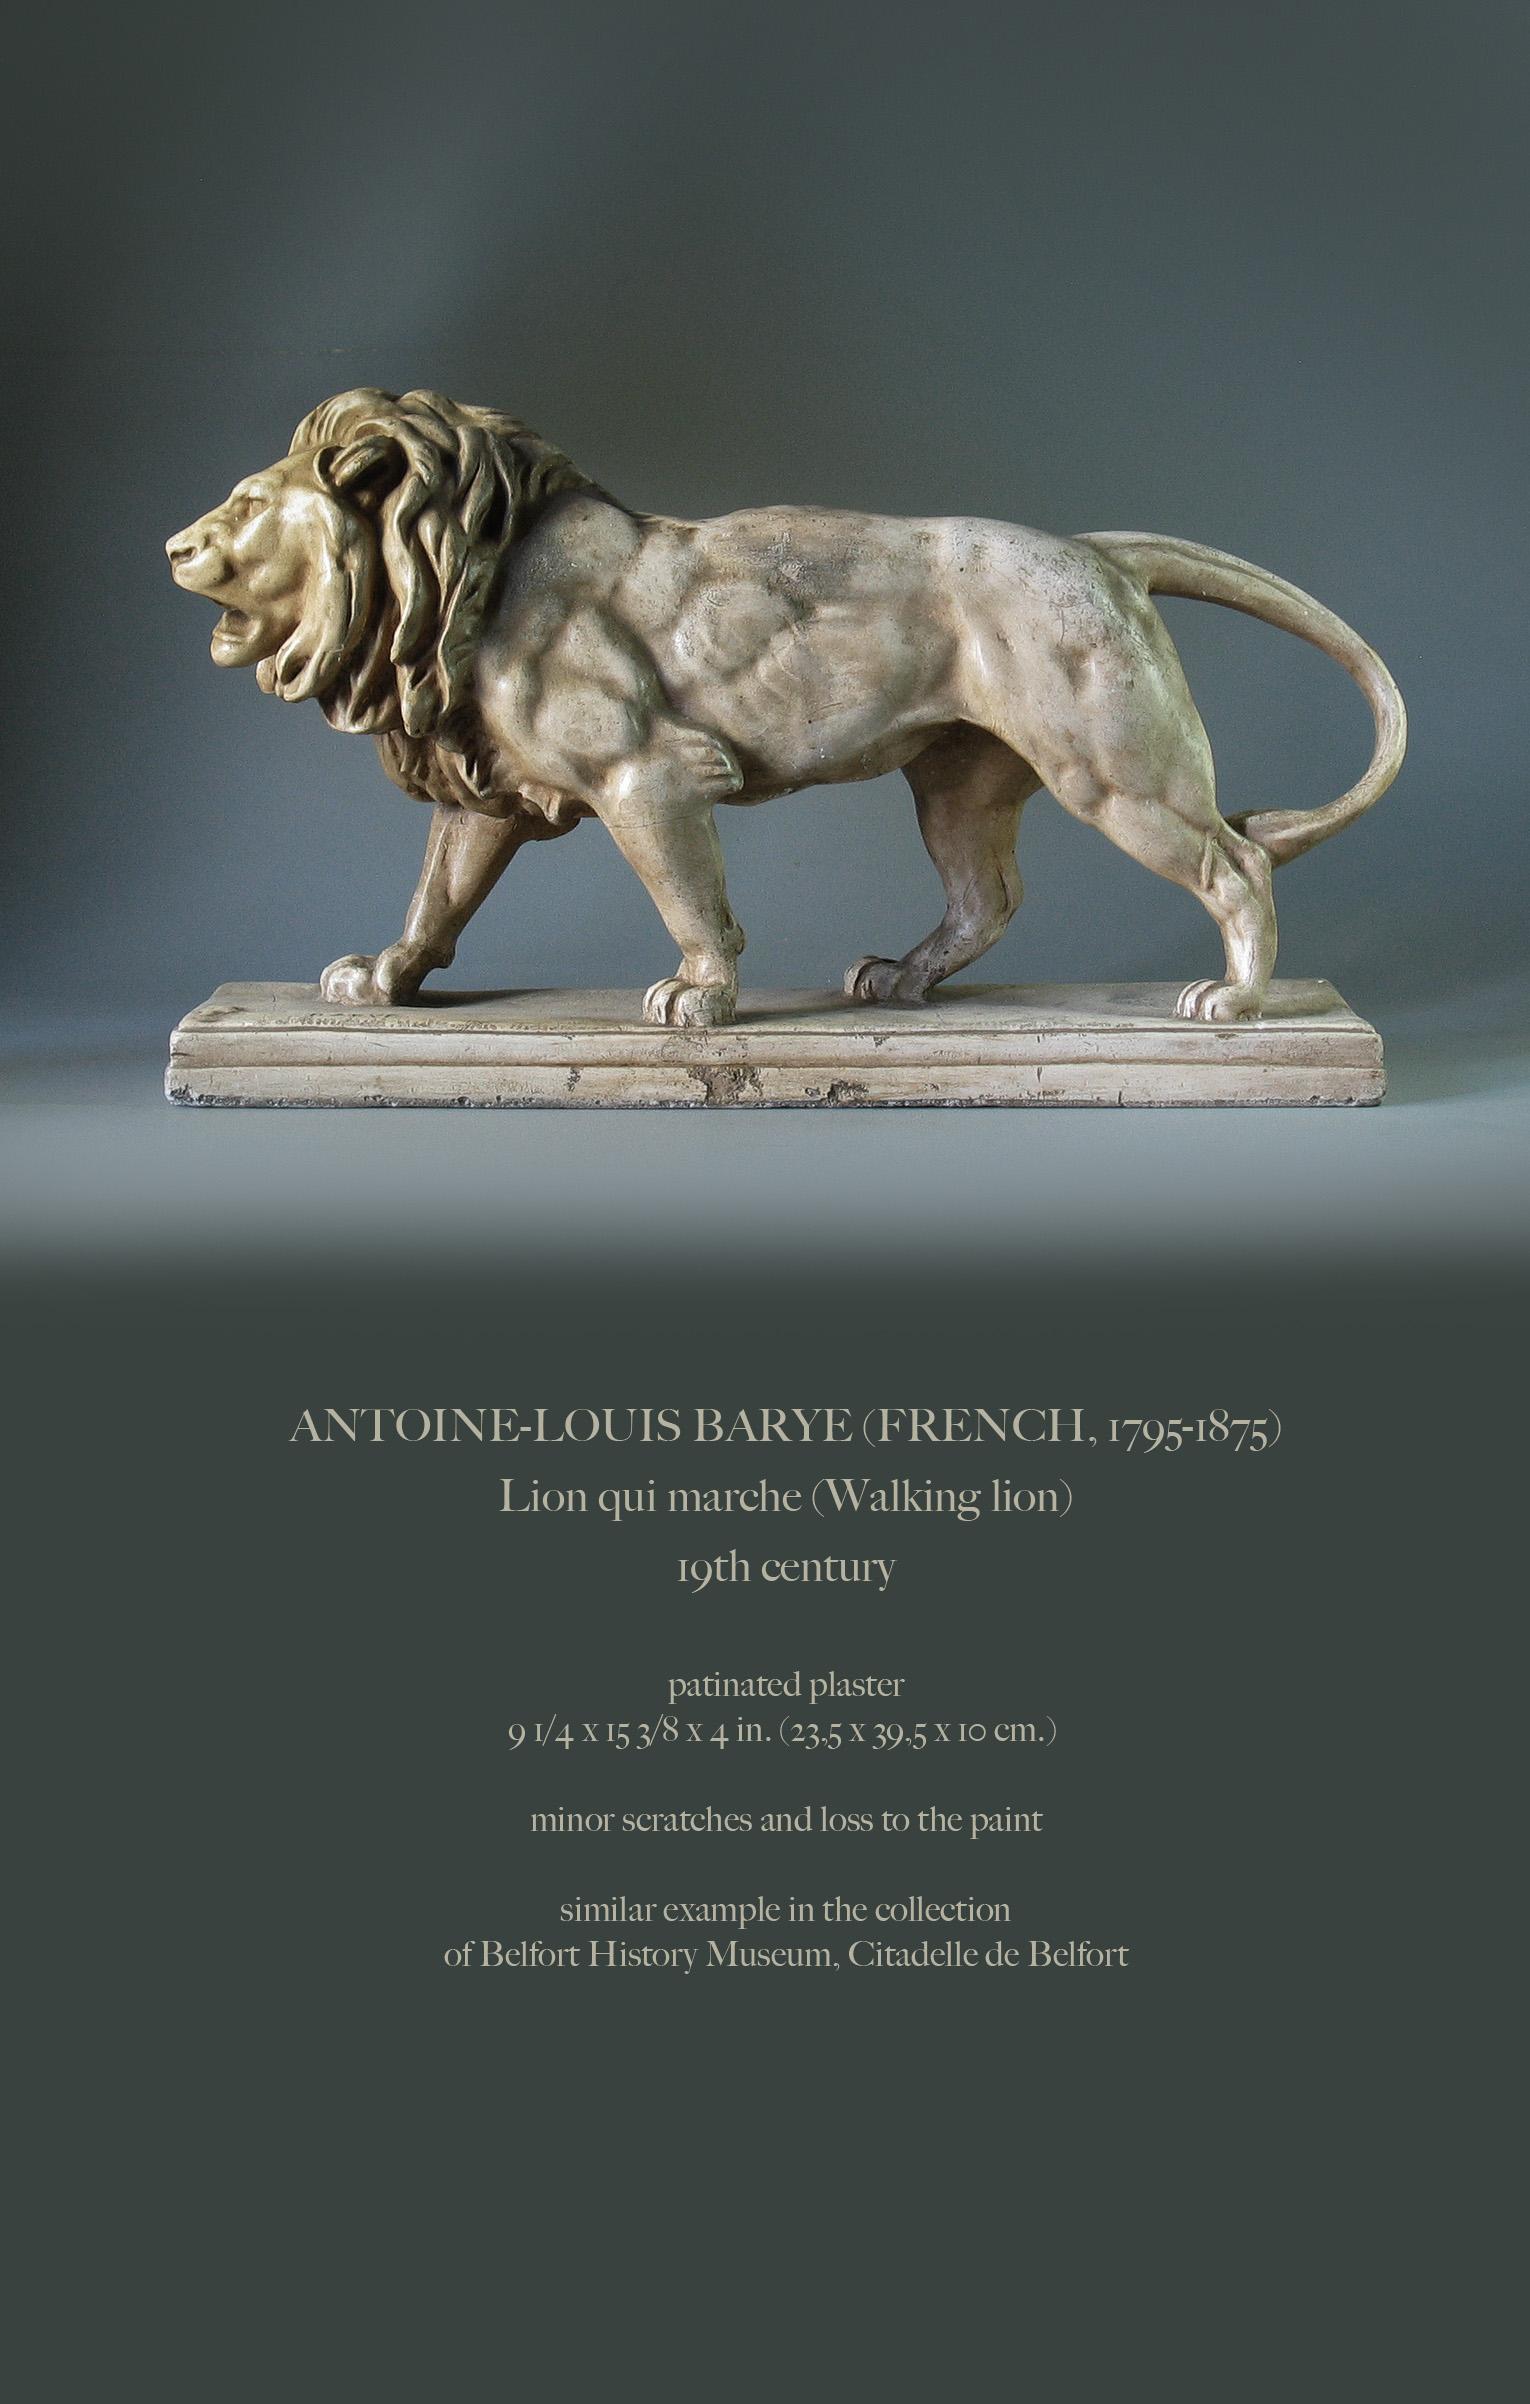 Antoine-Louis Barye (French, 1795-1875)
Lion qui marche (Walking lion)
19th century.

Patinated plaster
9 1/4 x 15 3/8 x 4 in. (23.5 x 39.5 x 10 cm.)
Minor scratches and loss to the paint

Similar example in the collection
of Belfort